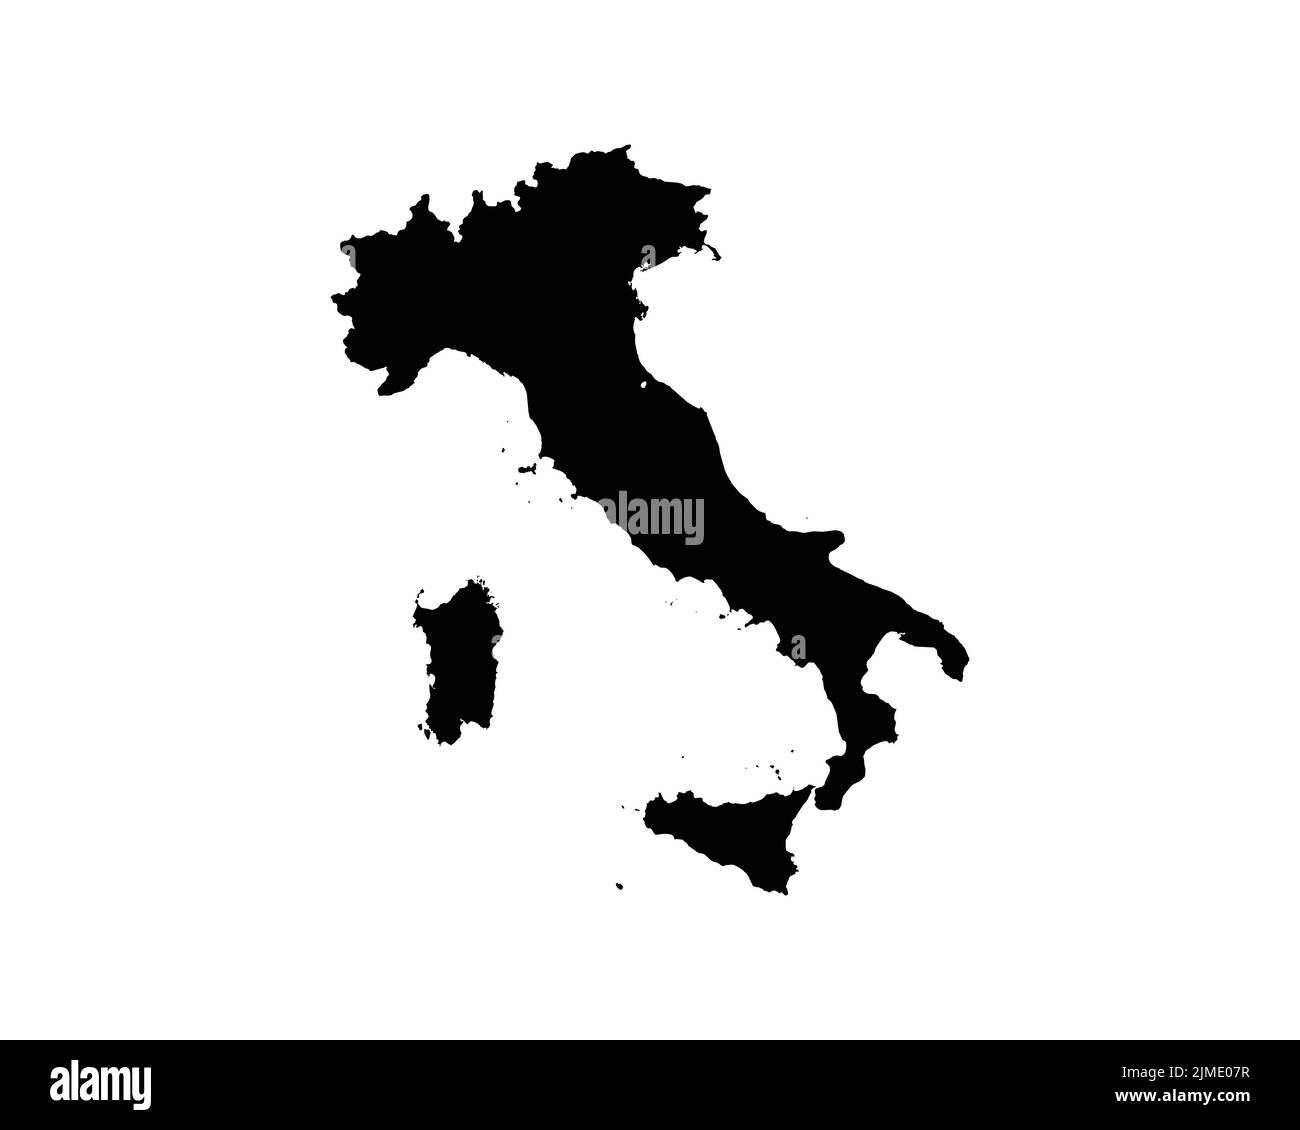 Italy Map. Italian Country Map. Black and White Italiana National Nation Outline Geography Border Boundary Shape Territory Vector Illustration EPS Cli Stock Vector